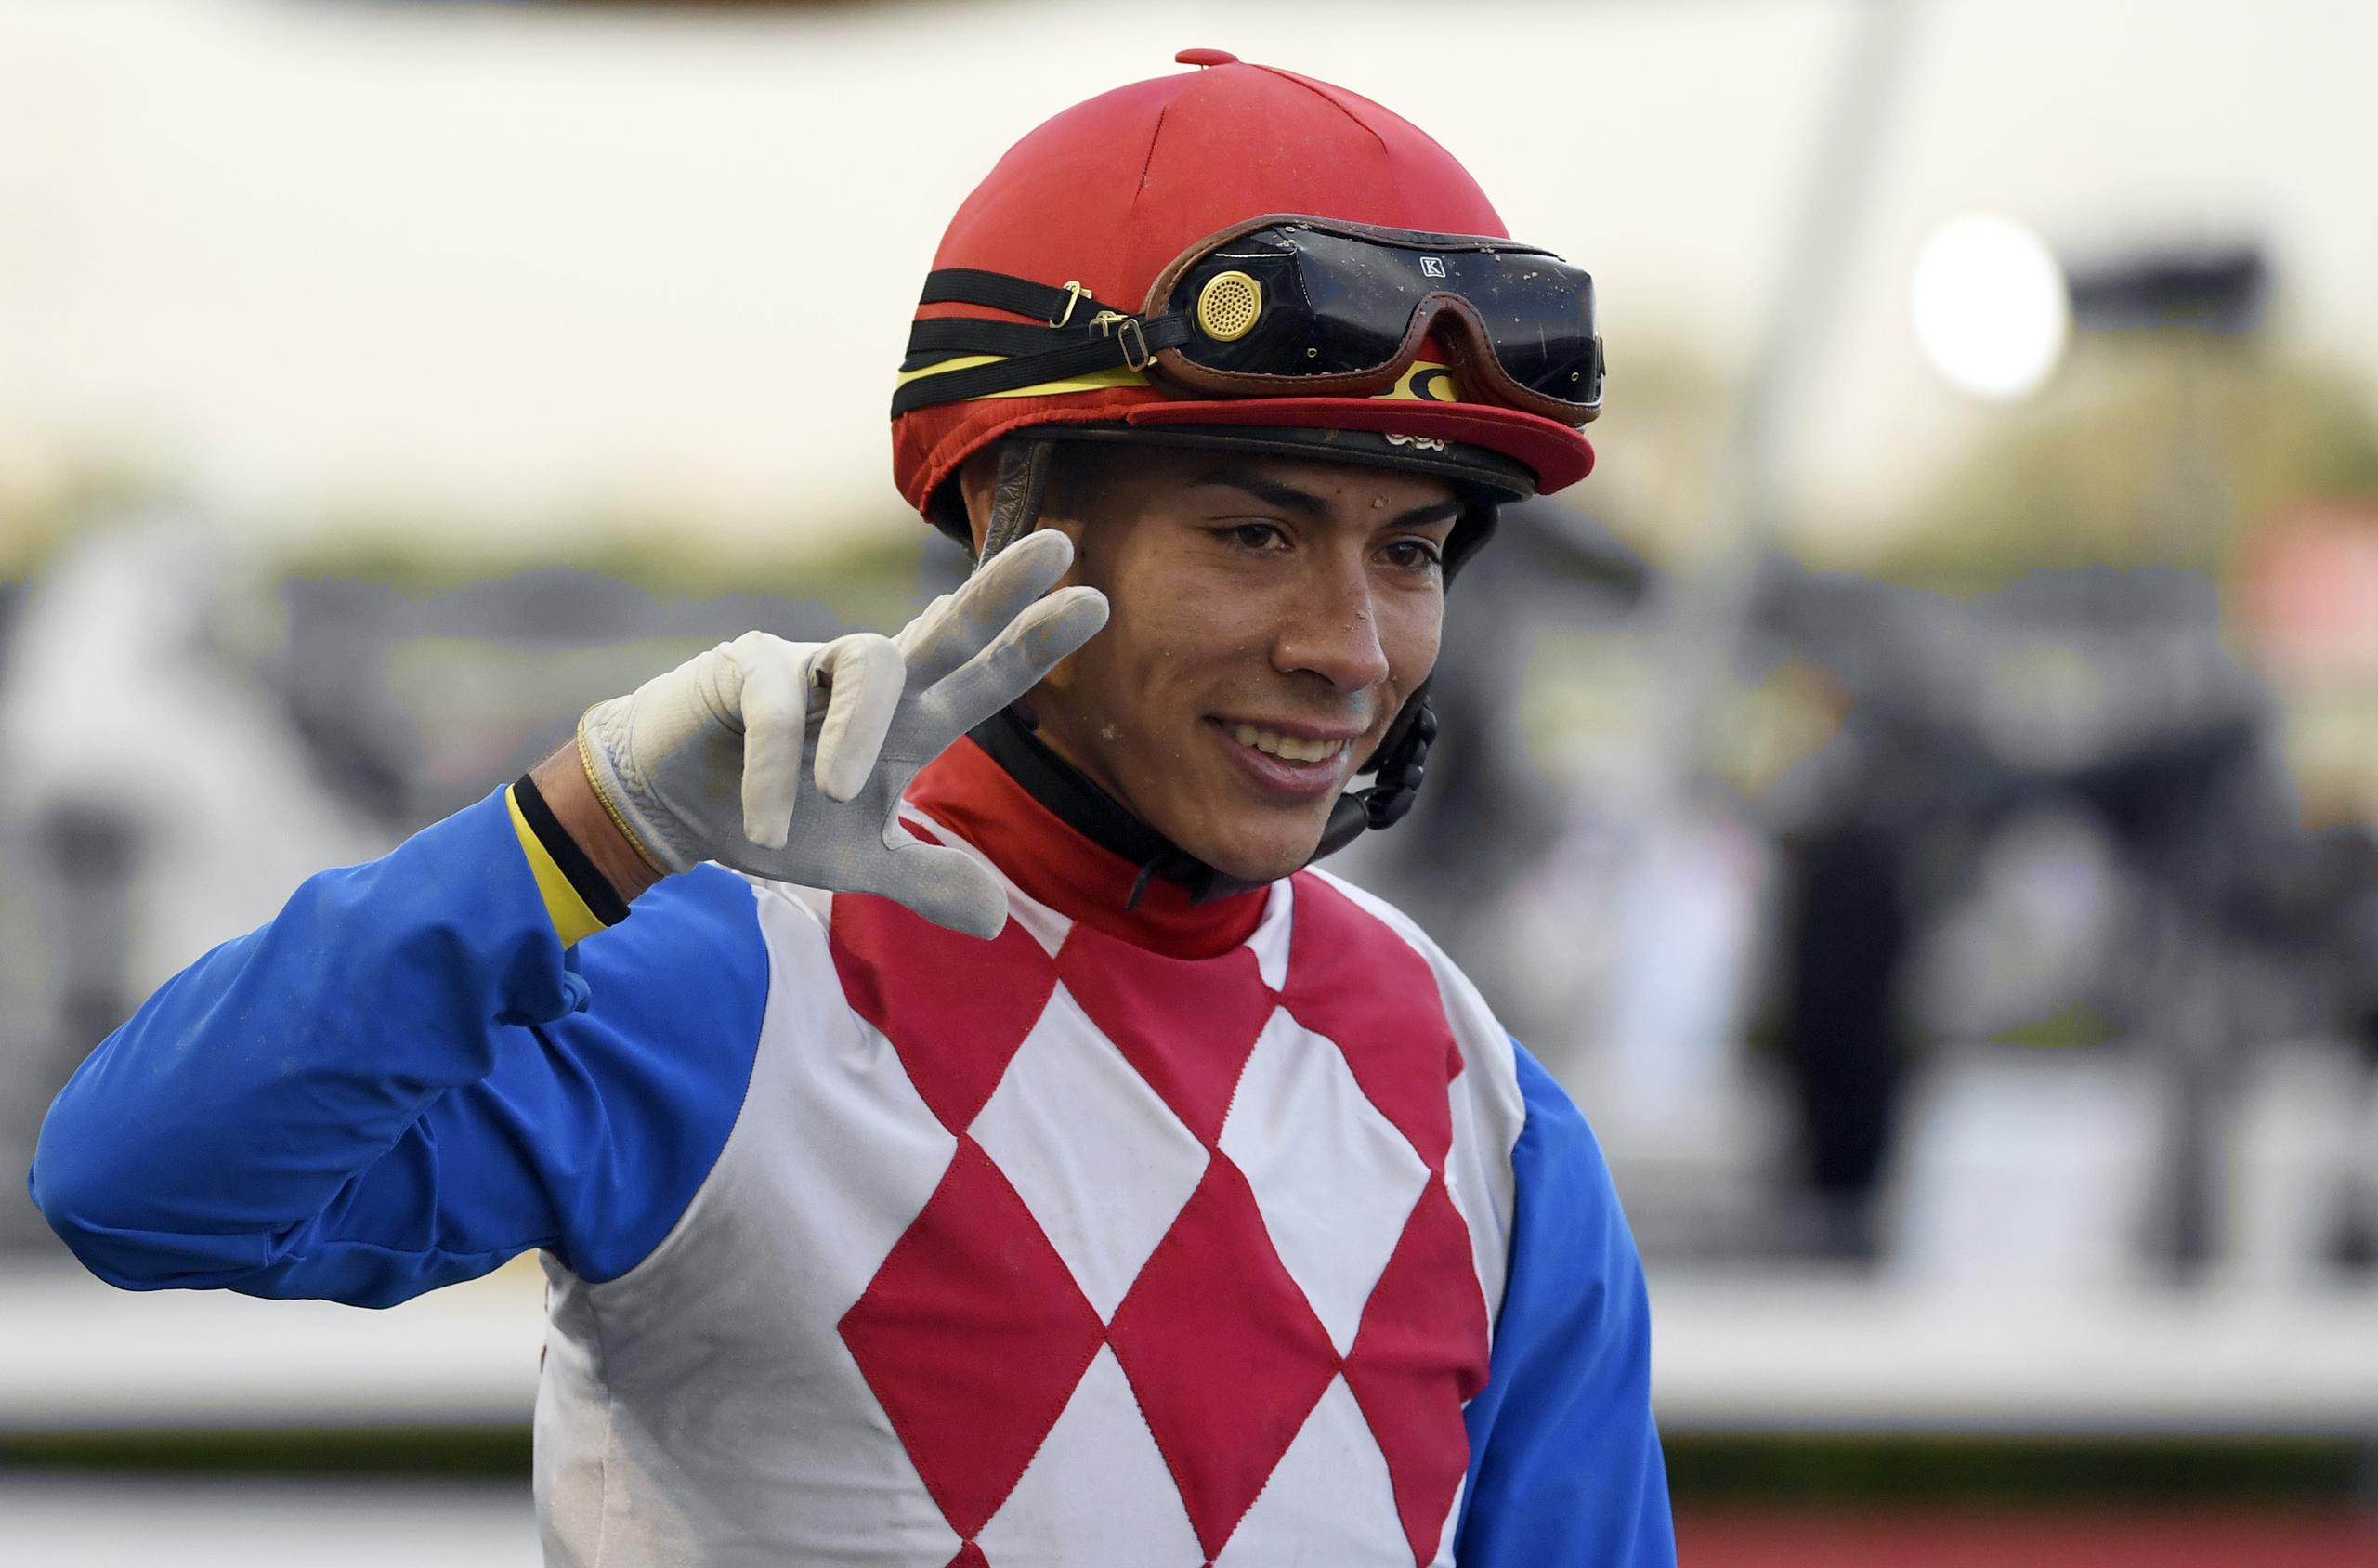 Jockey Jose Ortiz reacts after winning with Plus Que Parfait the $2.5 million Group 2 UAE Derby over 1900m in Dubai, United Arab Emirates, Saturday, March 30, 2019. (AP Photo/Martin Dokoupil)